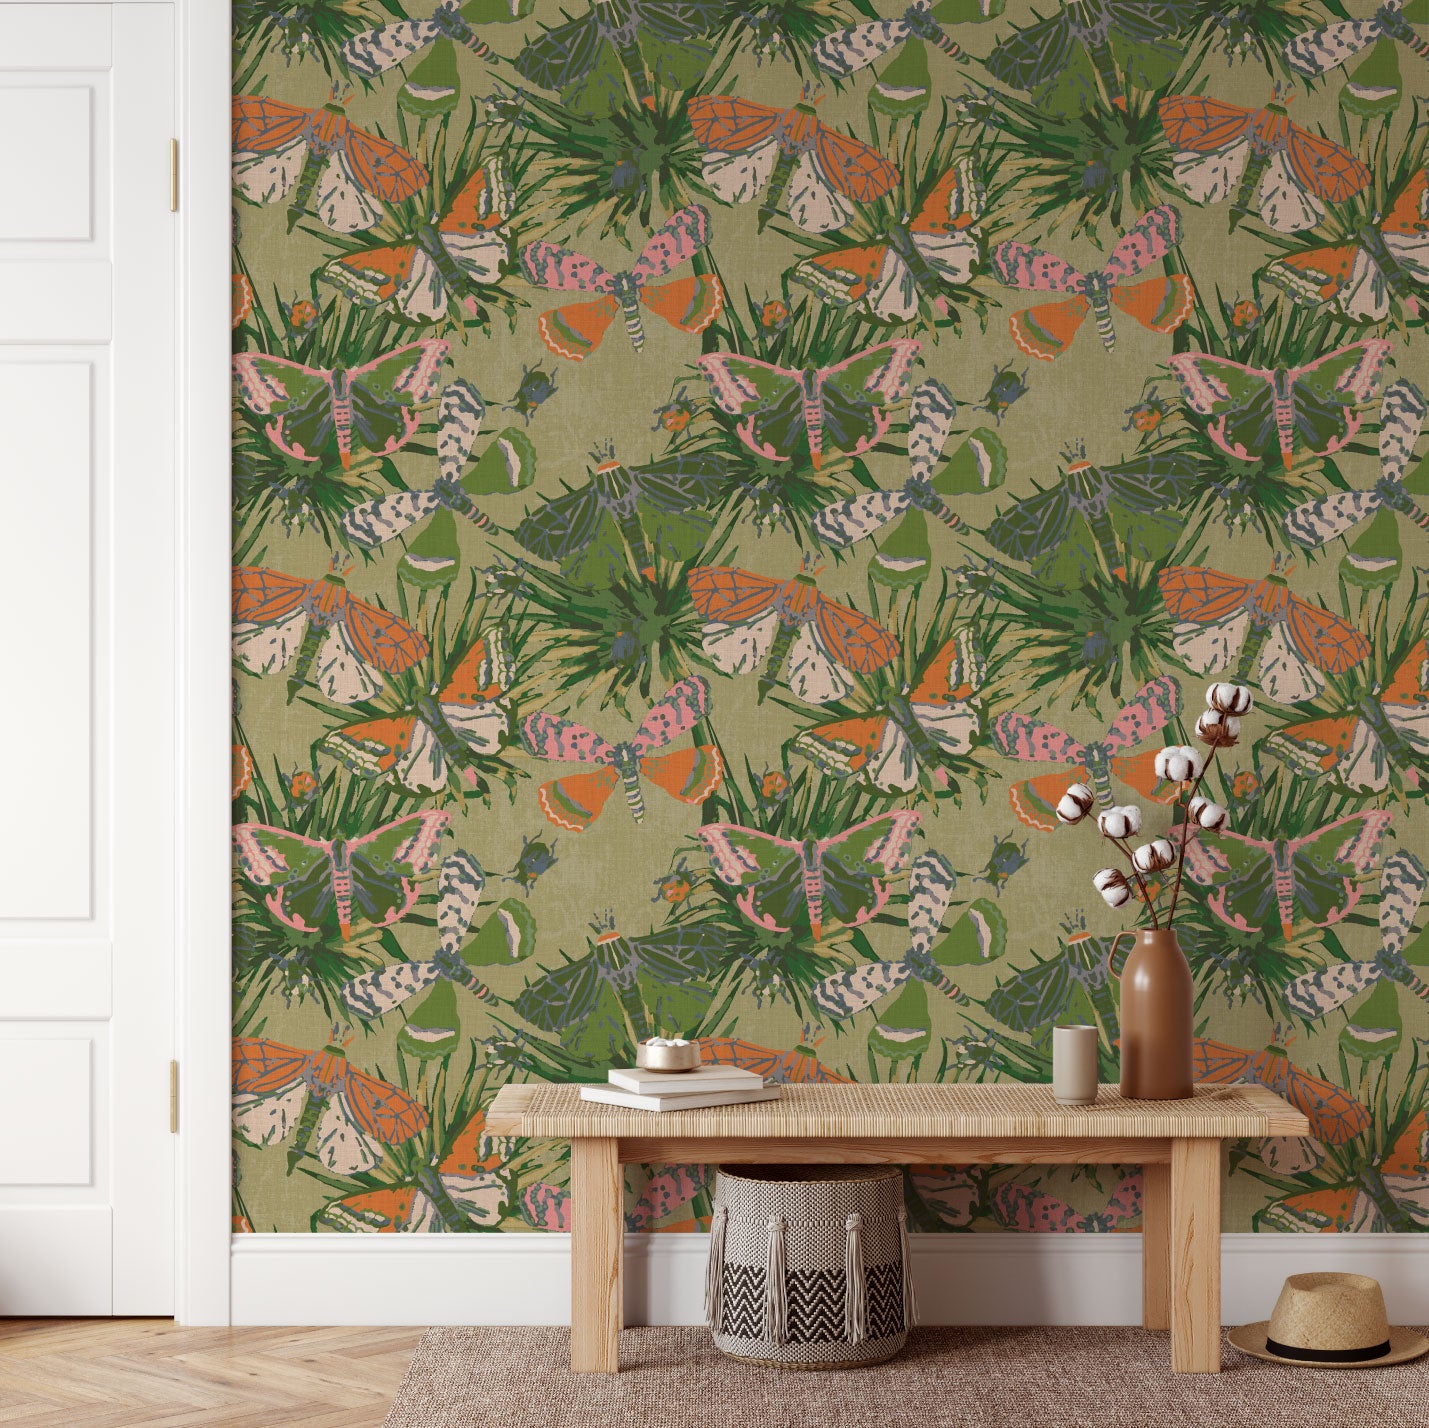 wallpaper Natural Textured Eco-Friendly Non-toxic High-quality Sustainable Interior Design Bold Custom Tailor-made Retro chic Bold tropical butterfly bug palm leaves animals botanical garden nature kids playroom bedroom nursery green moss jungle olive linen